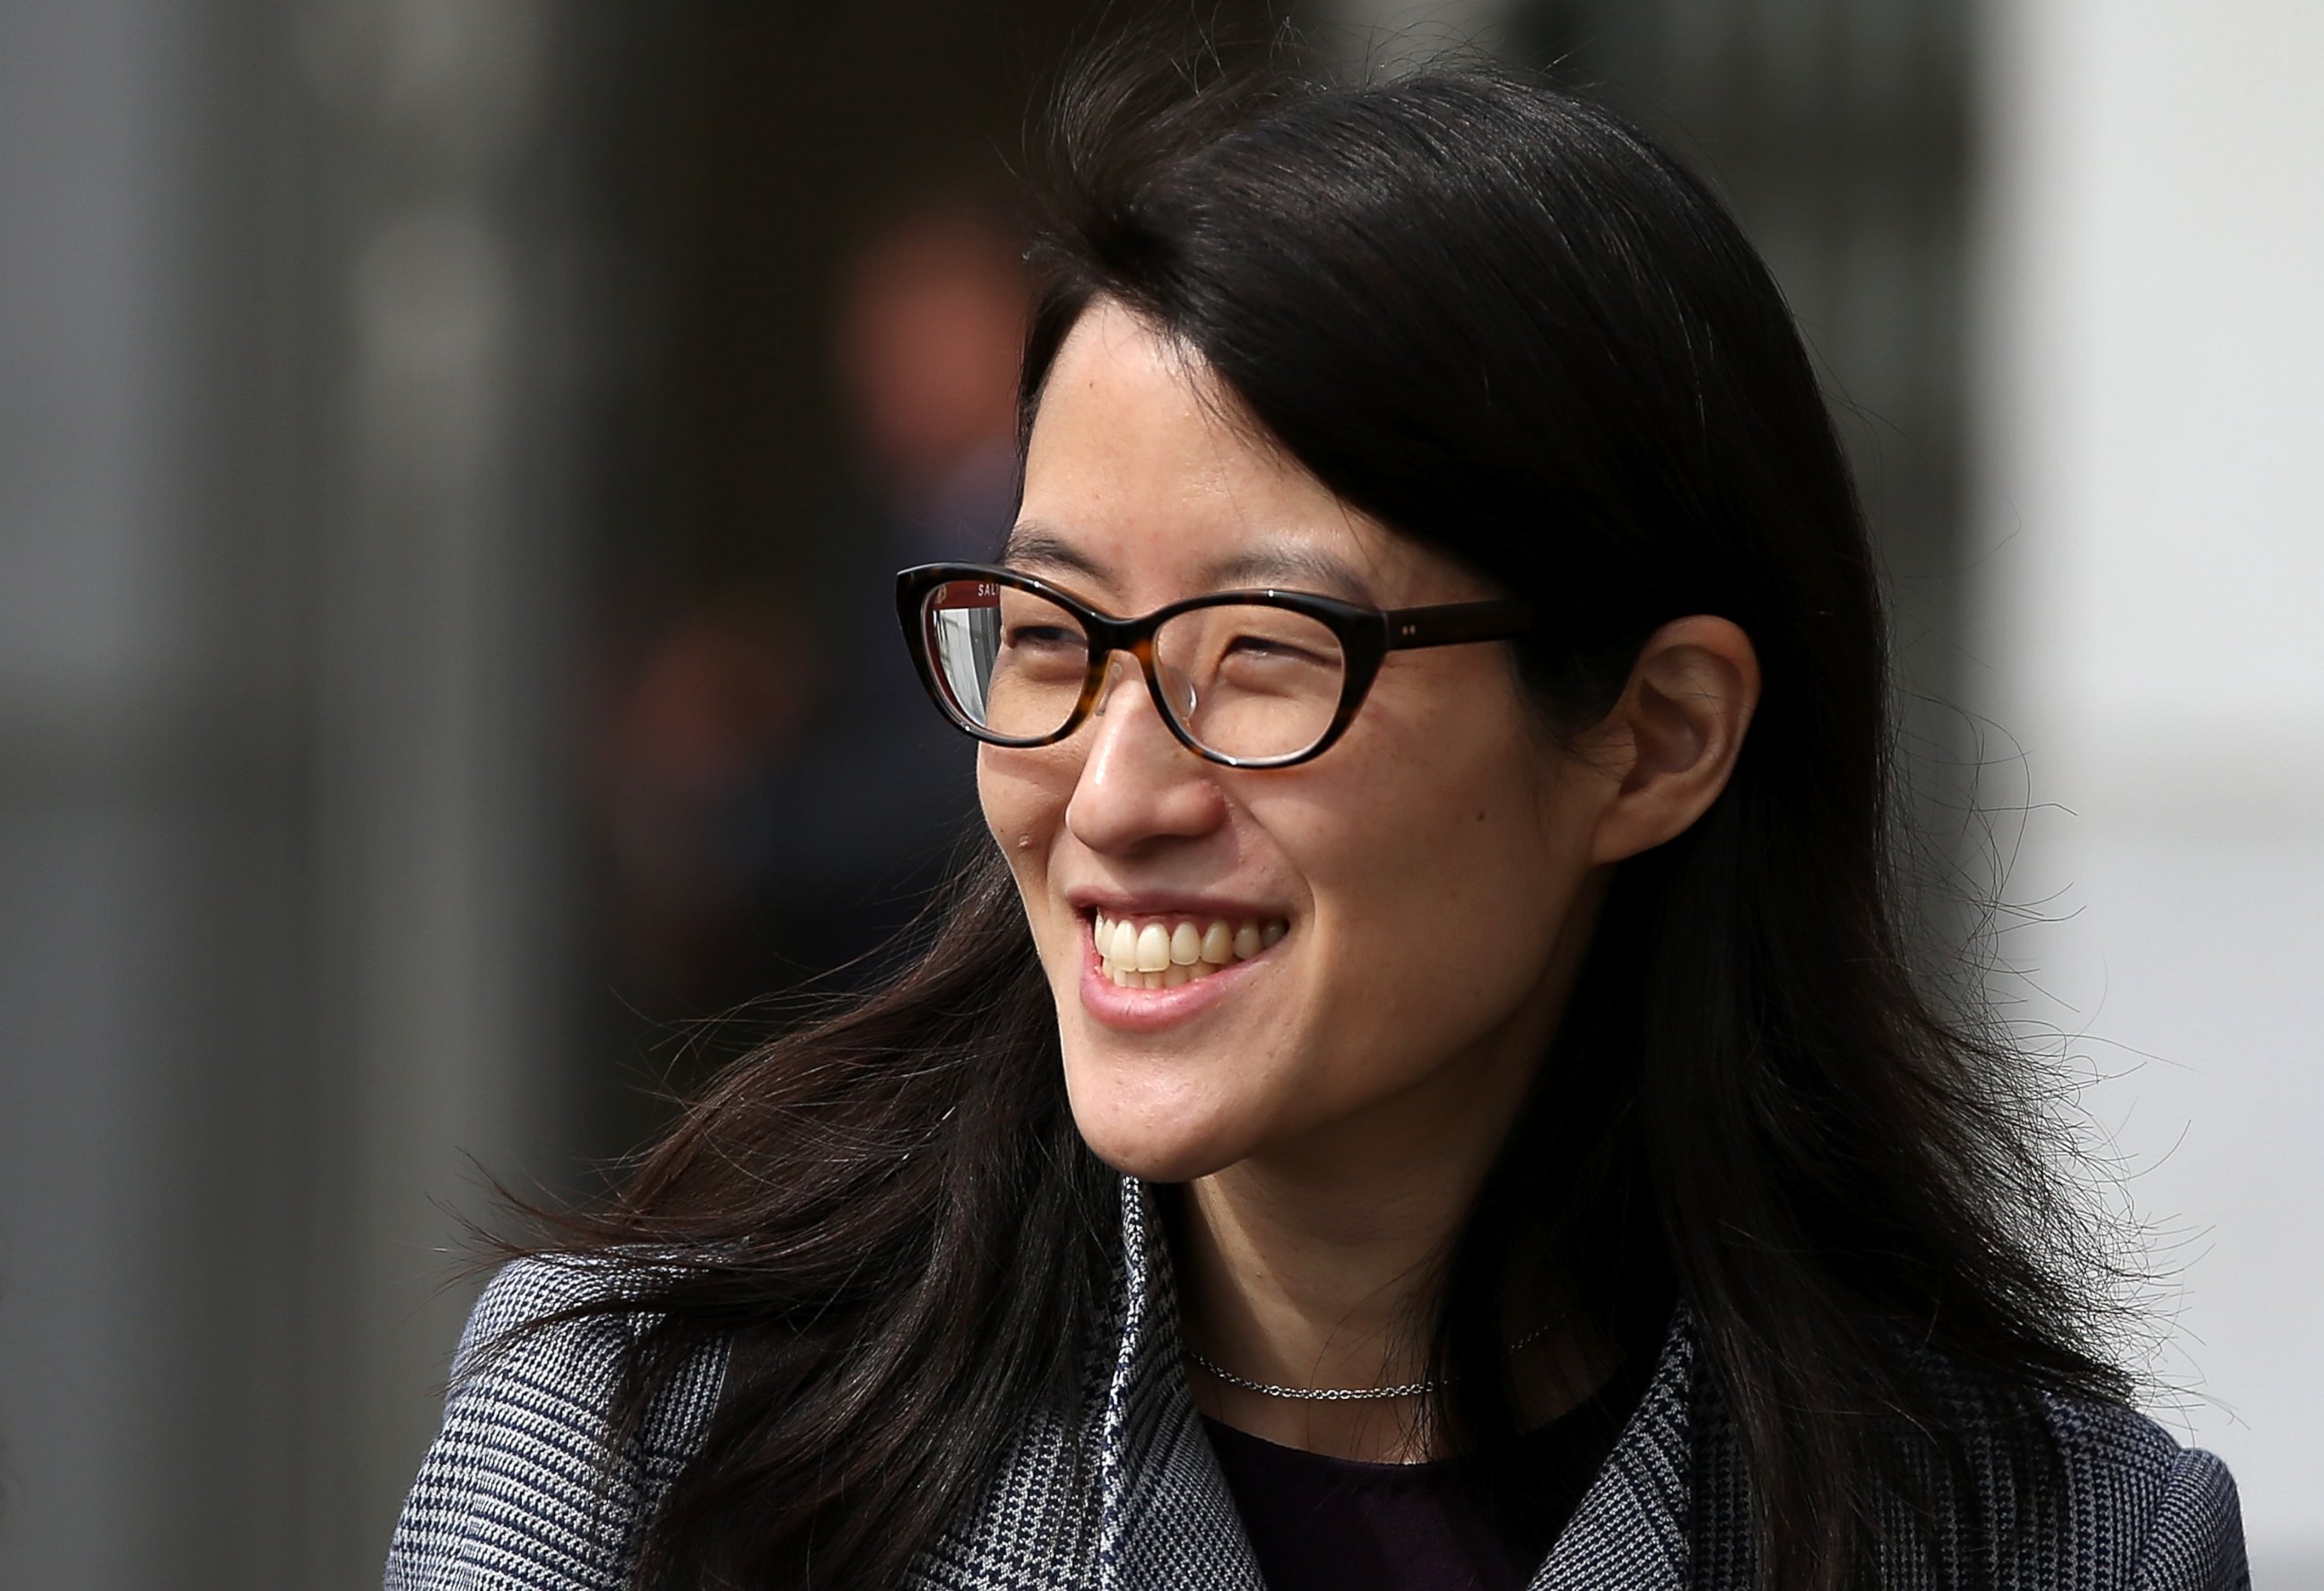 PHOTO: Ellen Pao leaves the California Superior Court Civic Center Courthouse during a lunch break from her trial on March 10, 2015 in San Francisco, Calif.